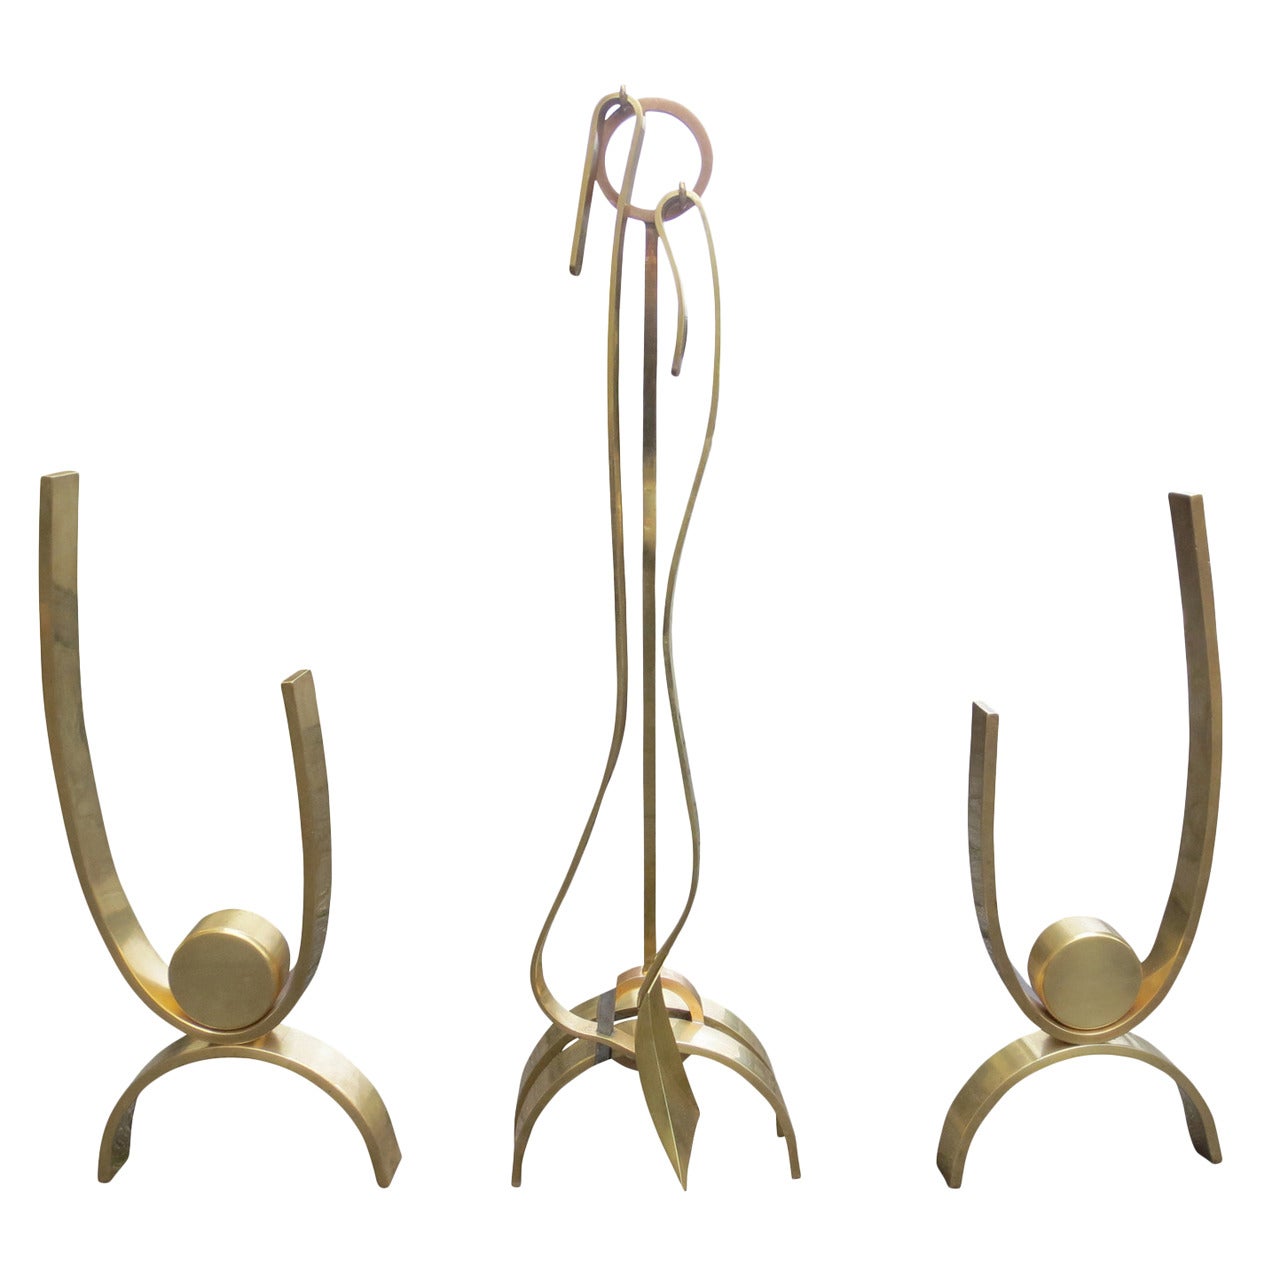 Pair of Mid-Century Brass Andirons and Fire Tools by Donald Deskey, circa 1940